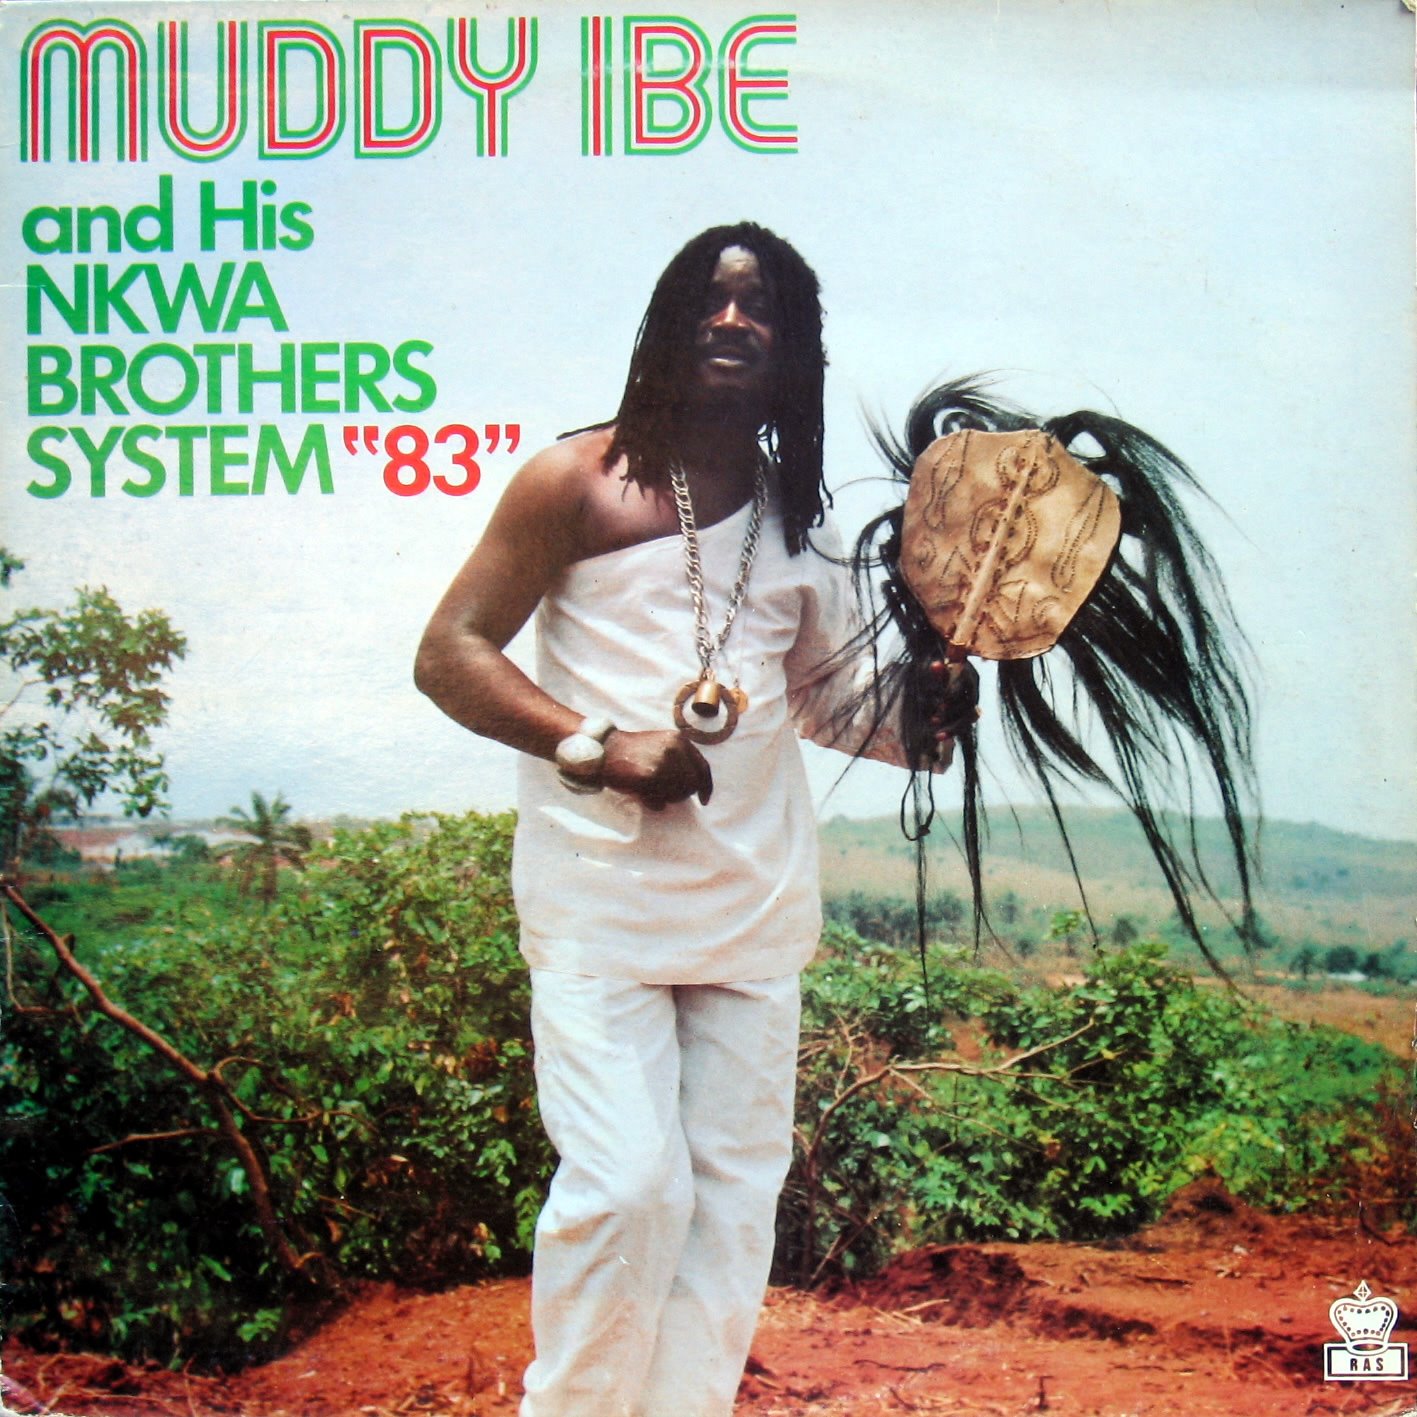 Muddy Ibe and his Nkwa Brothers System -“83″, RAS 1983 Muddy-Ibe-front